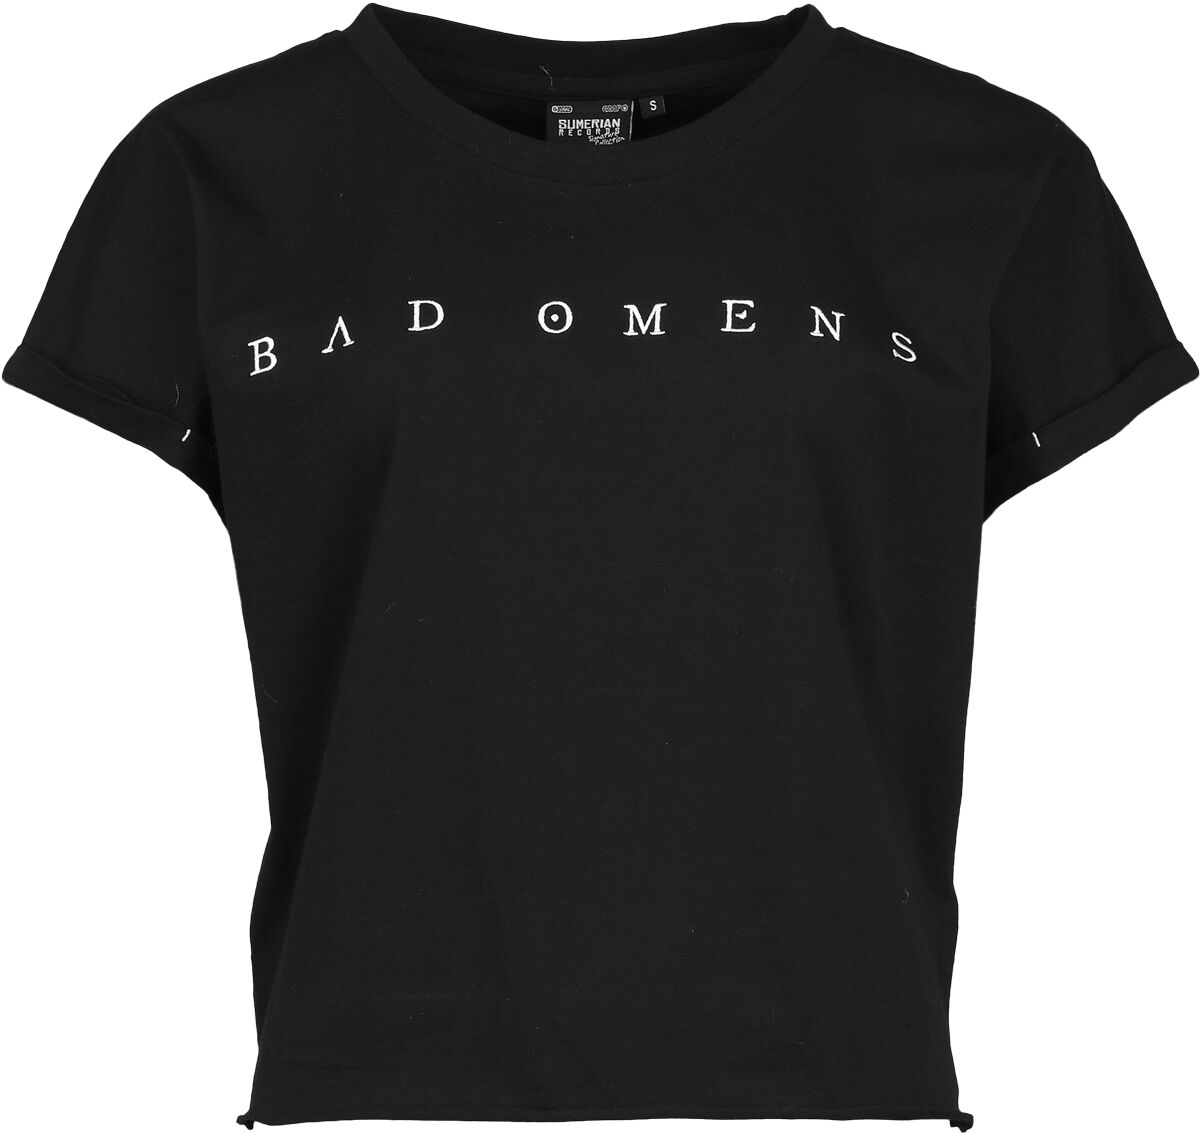 Bad Omens EMP Signature Collection T-Shirt schwarz in 3XL